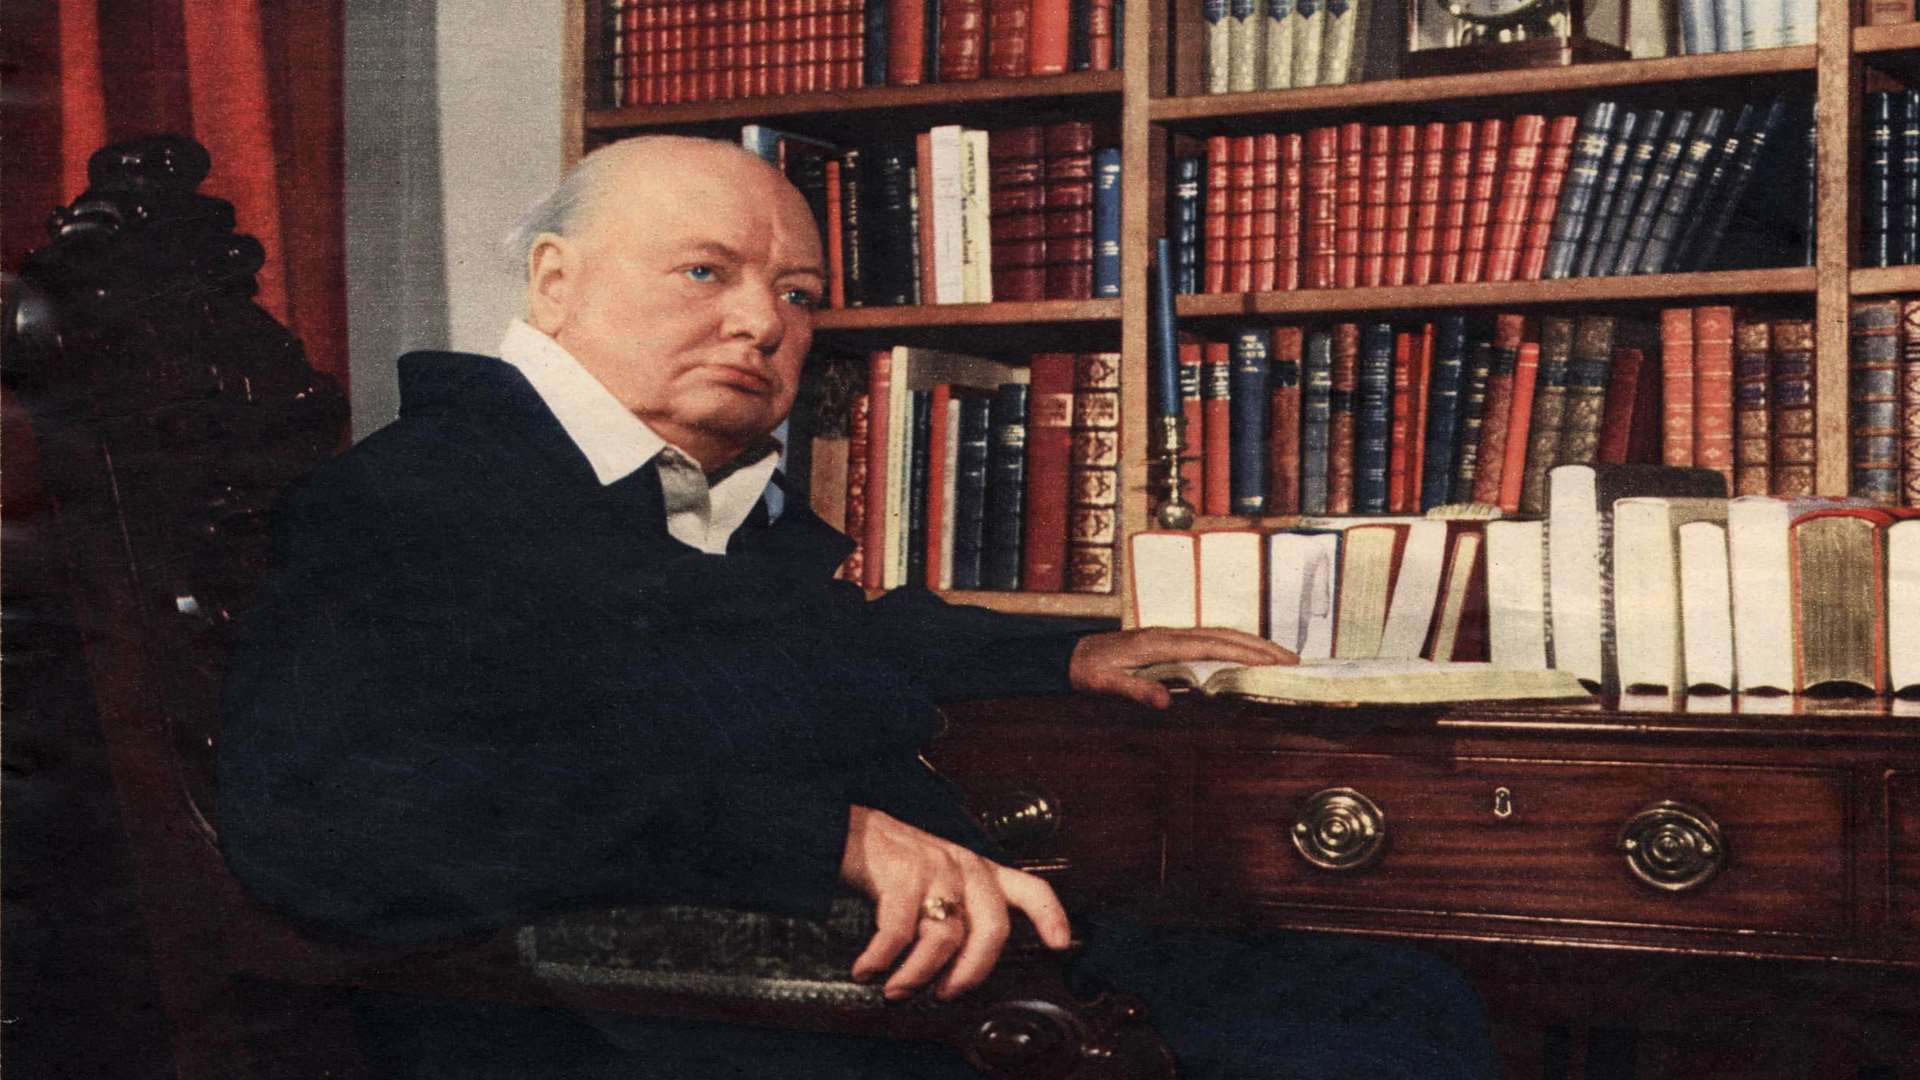 Churchill pictured in his study at Chartwell in 1951